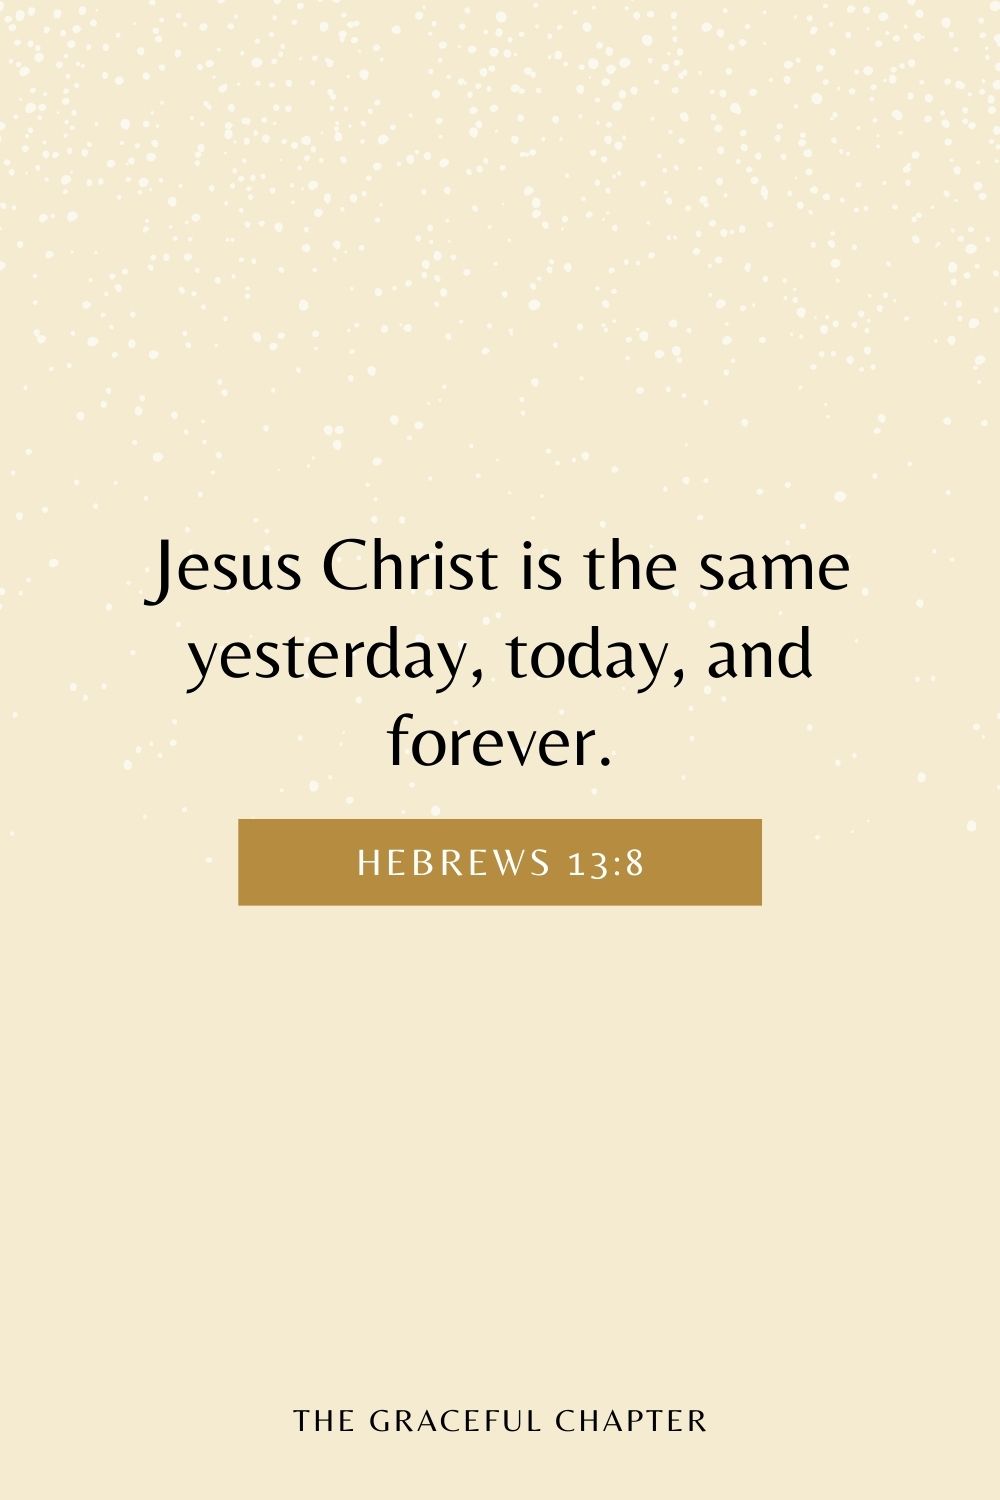 Jesus Christ is the same yesterday, today, and forever. Hebrews 13:8